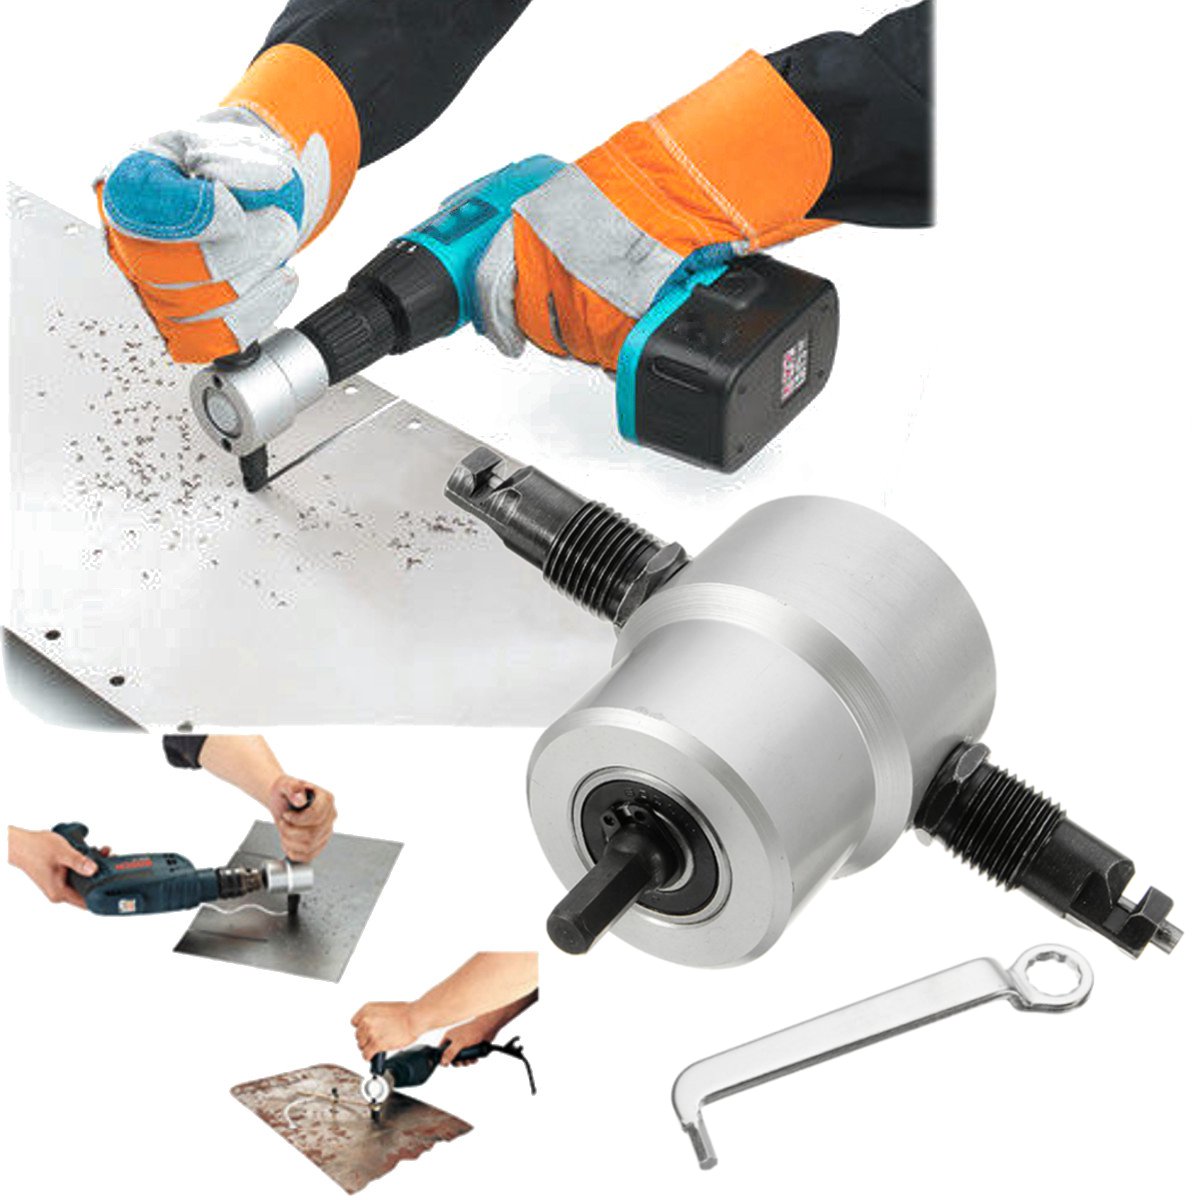 Drillpro-YT-160A-Double-Head-Sheet-Metal-Nibbler-Cutter-With-Metal-Box-Drill-Attachment-Metal-Sheet--1531537-14